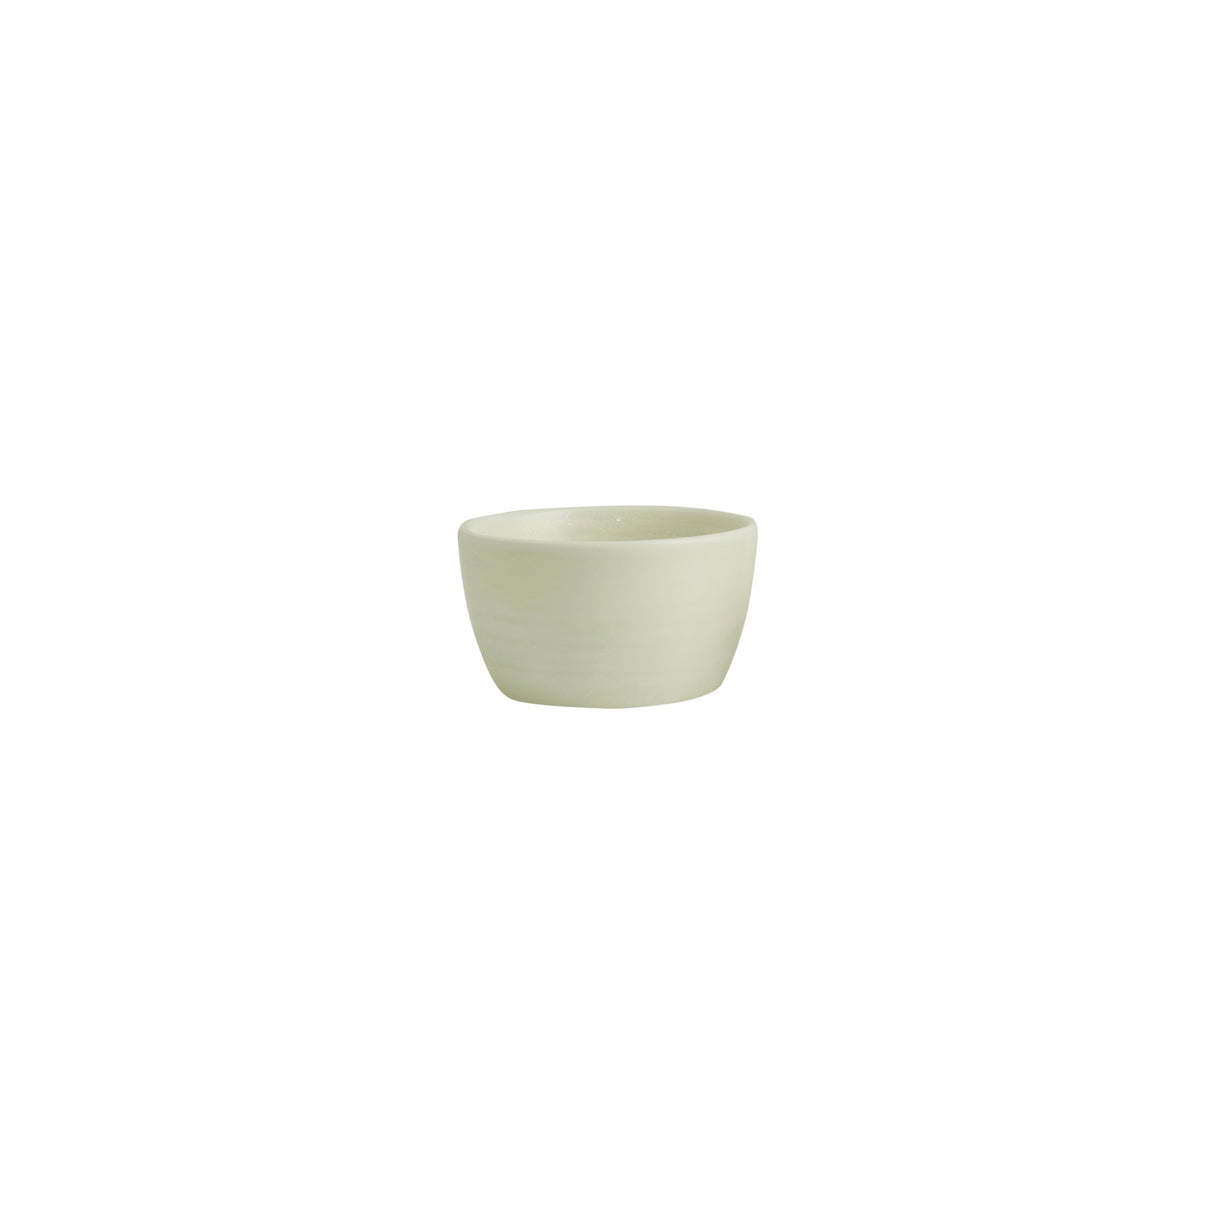 Ramekin - 130Ml, Lush from Moda Porcelain. made out of Porcelain and sold in boxes of 12. Hospitality quality at wholesale price with The Flying Fork! 